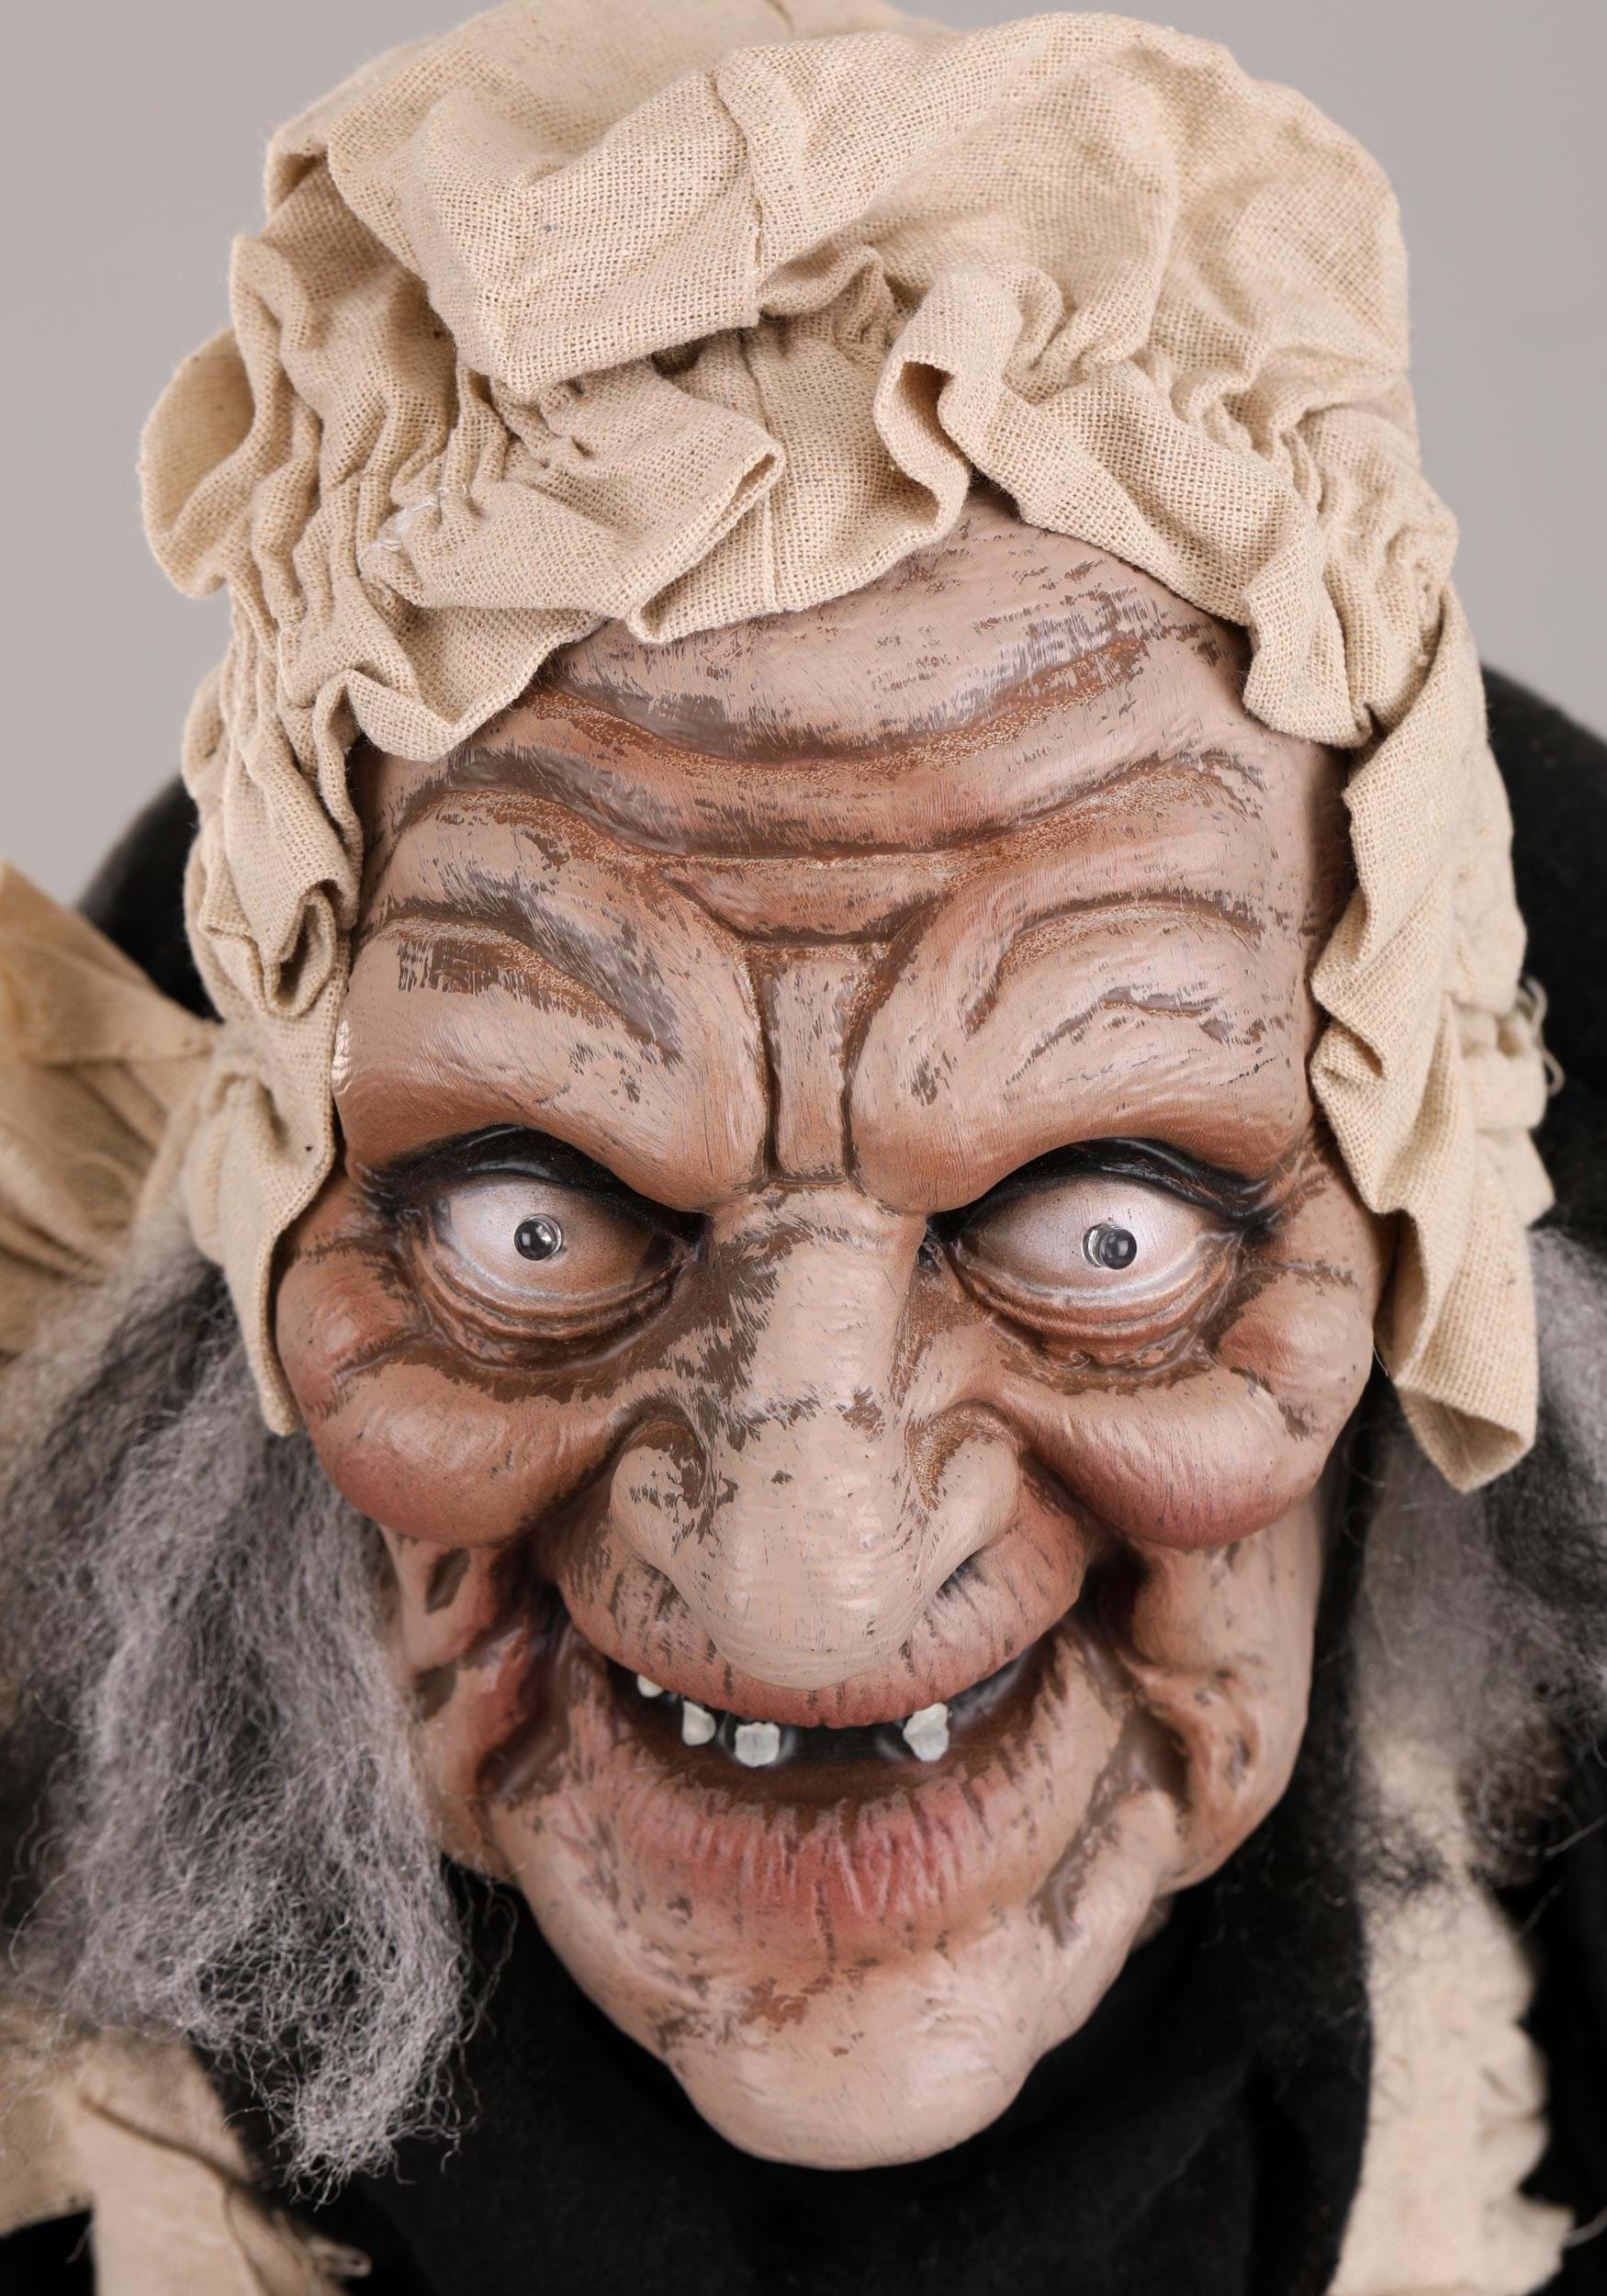 https://images.halloweencostumes.ca/products/74114/2-1-196348/5ft-animated-greeter-old-lady-hag-decoration-alt-1.jpg